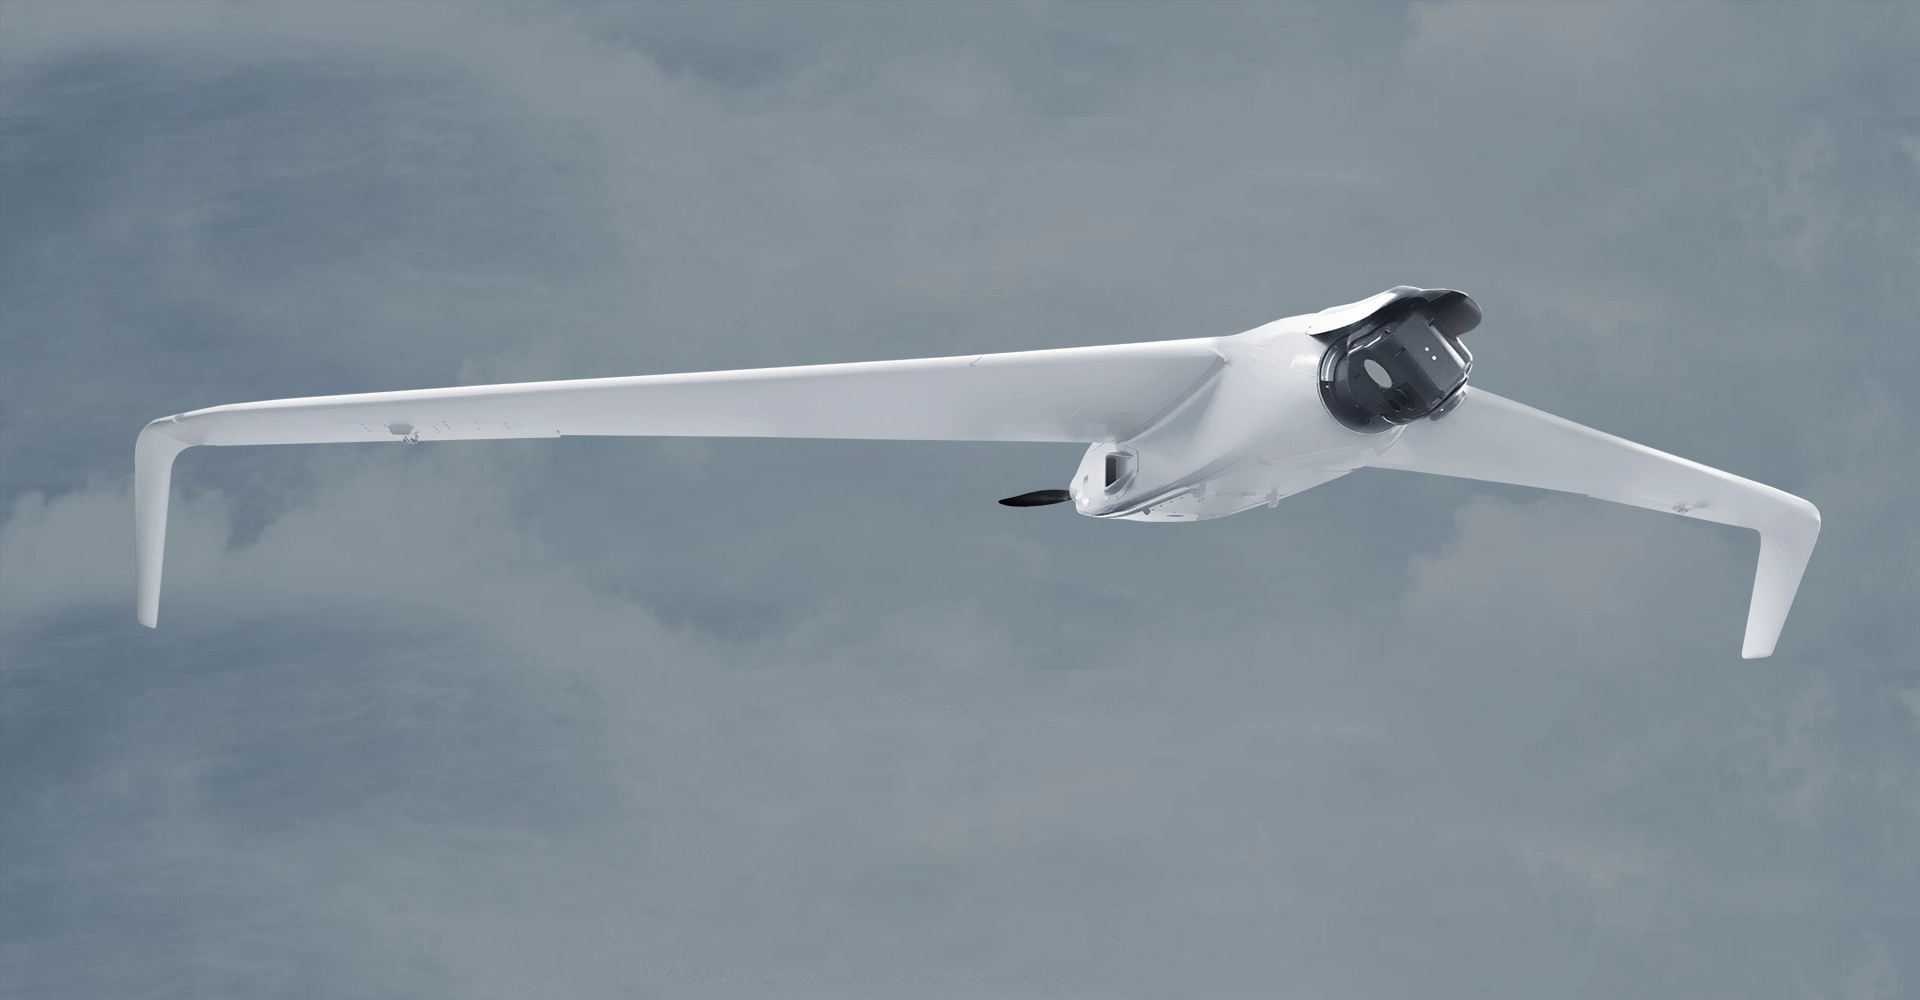 The first domestic unmanned aerial vehicle with hybrid propulsion system - ZALA 421-16E5G - has been unveiled